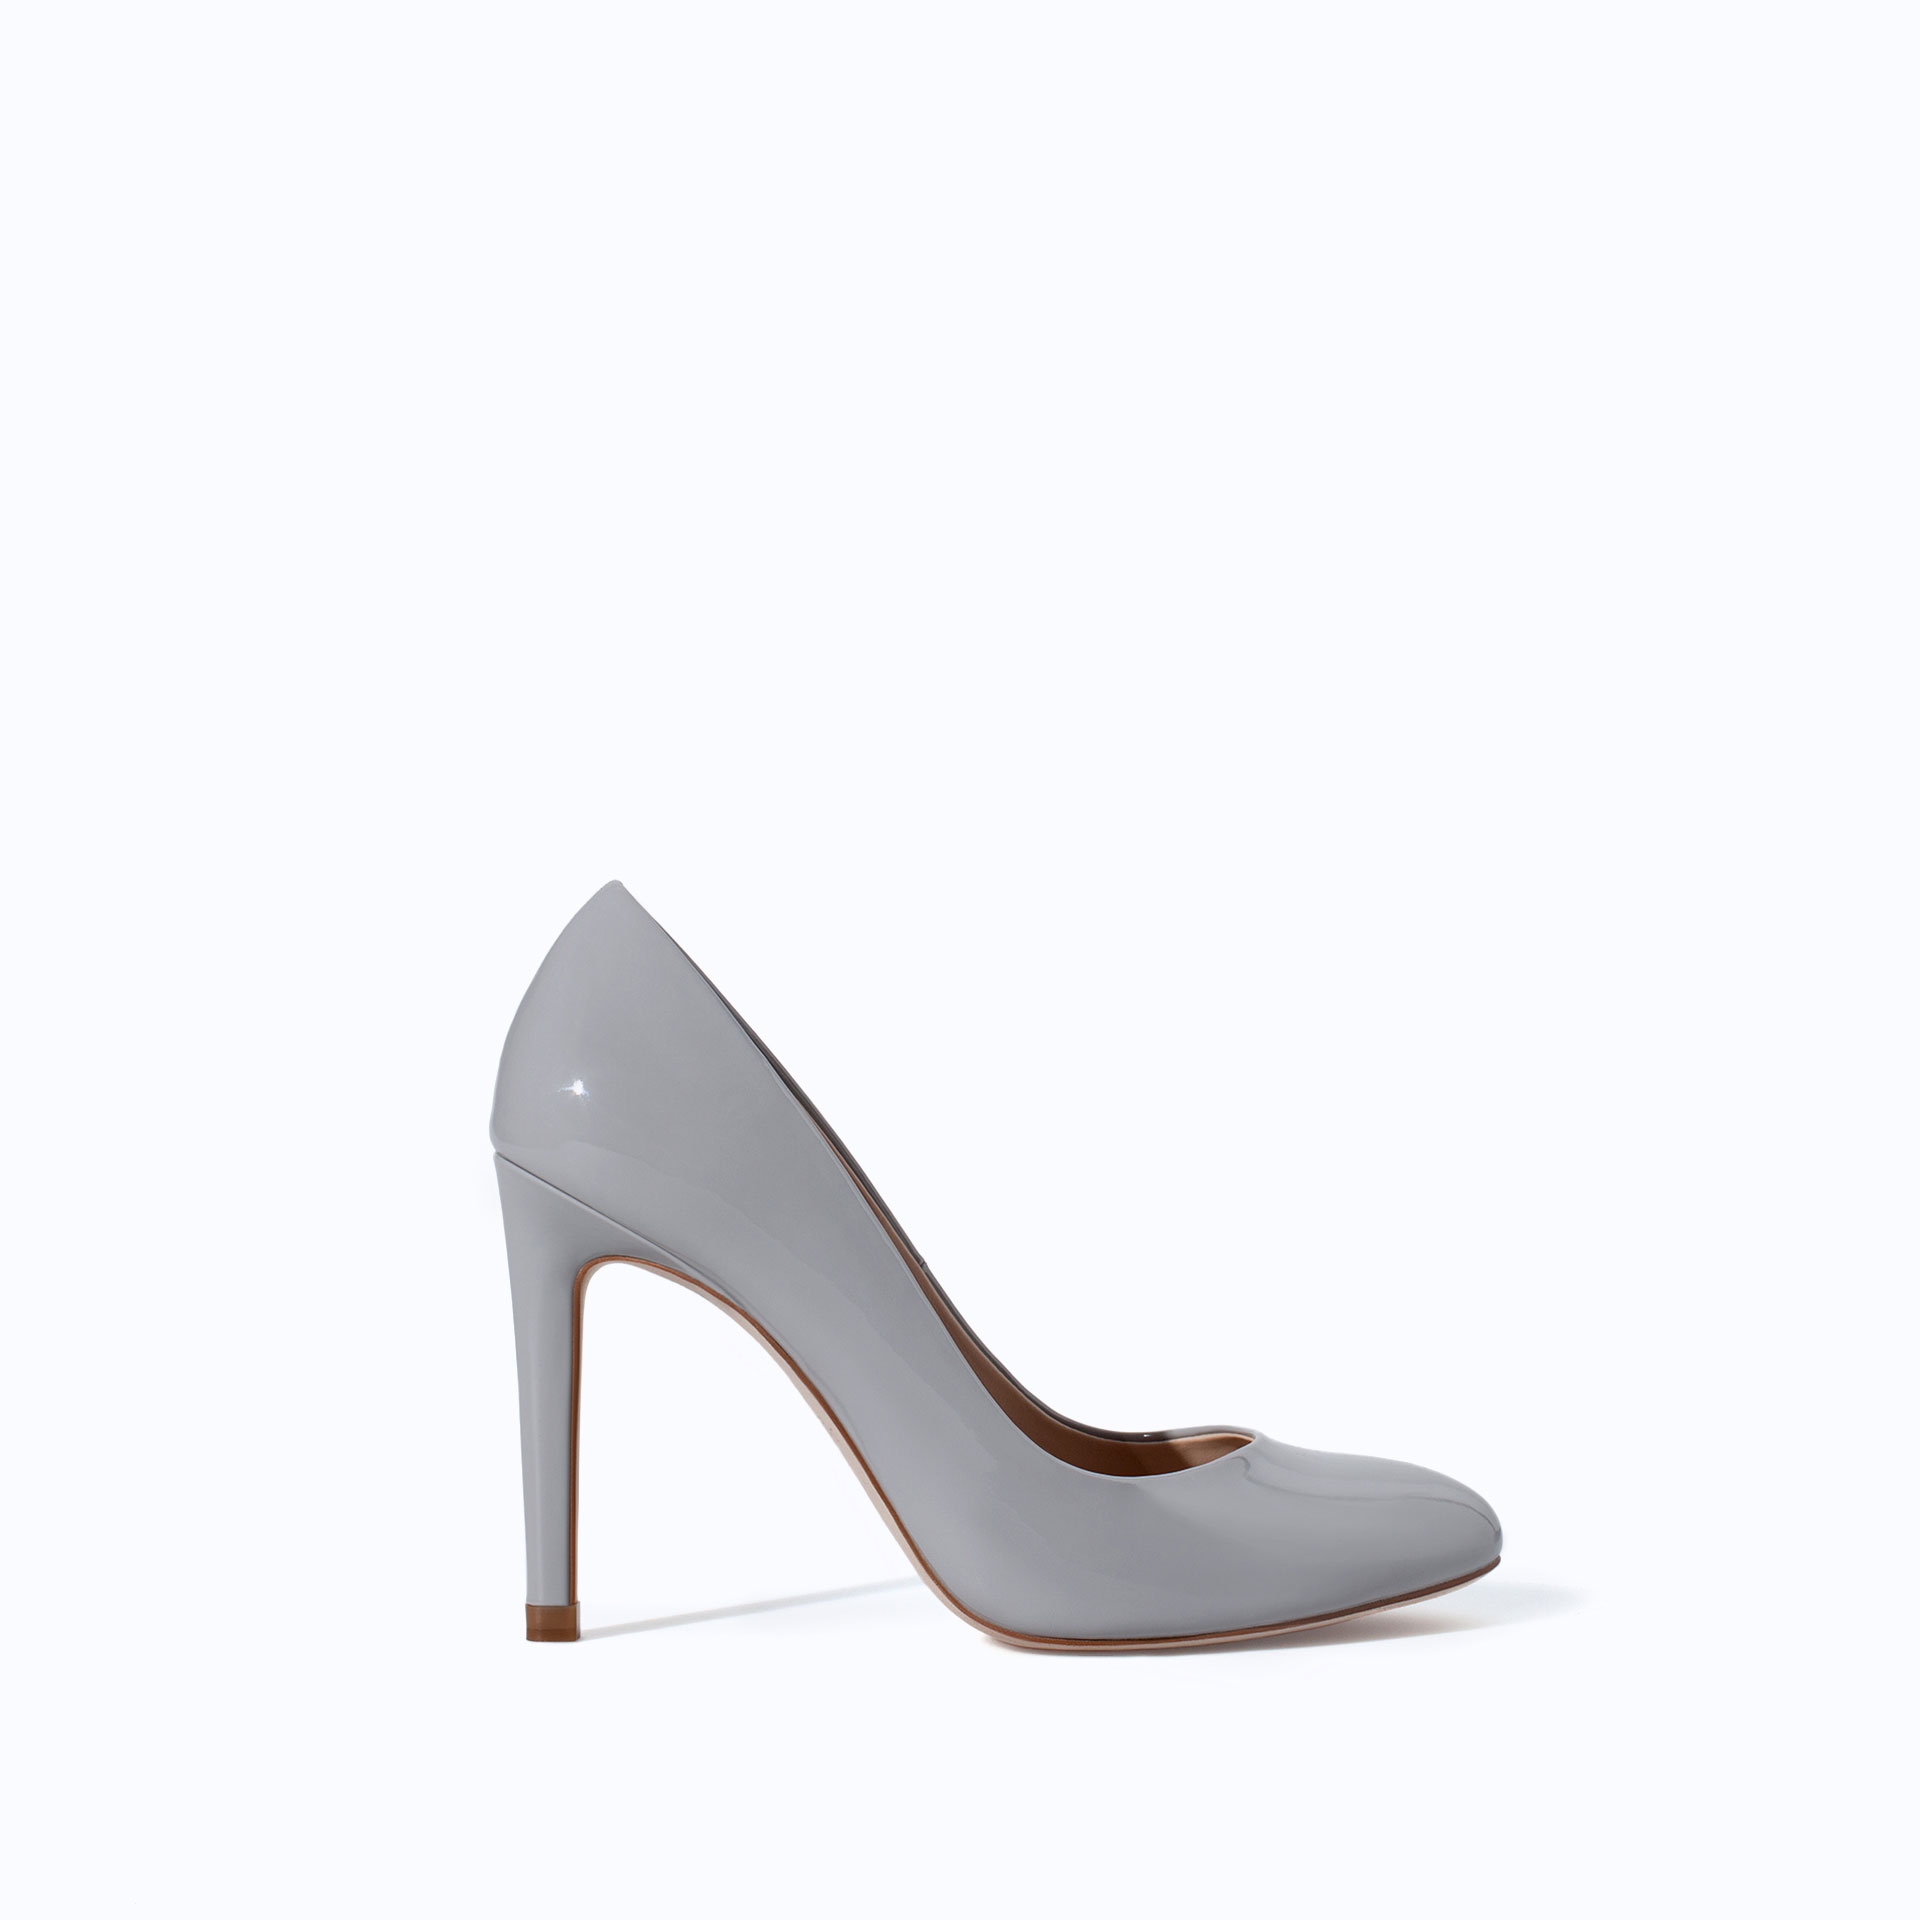 Zara Basic Synthetic Patent Leather High Heel Court Shoe in Gray | Lyst